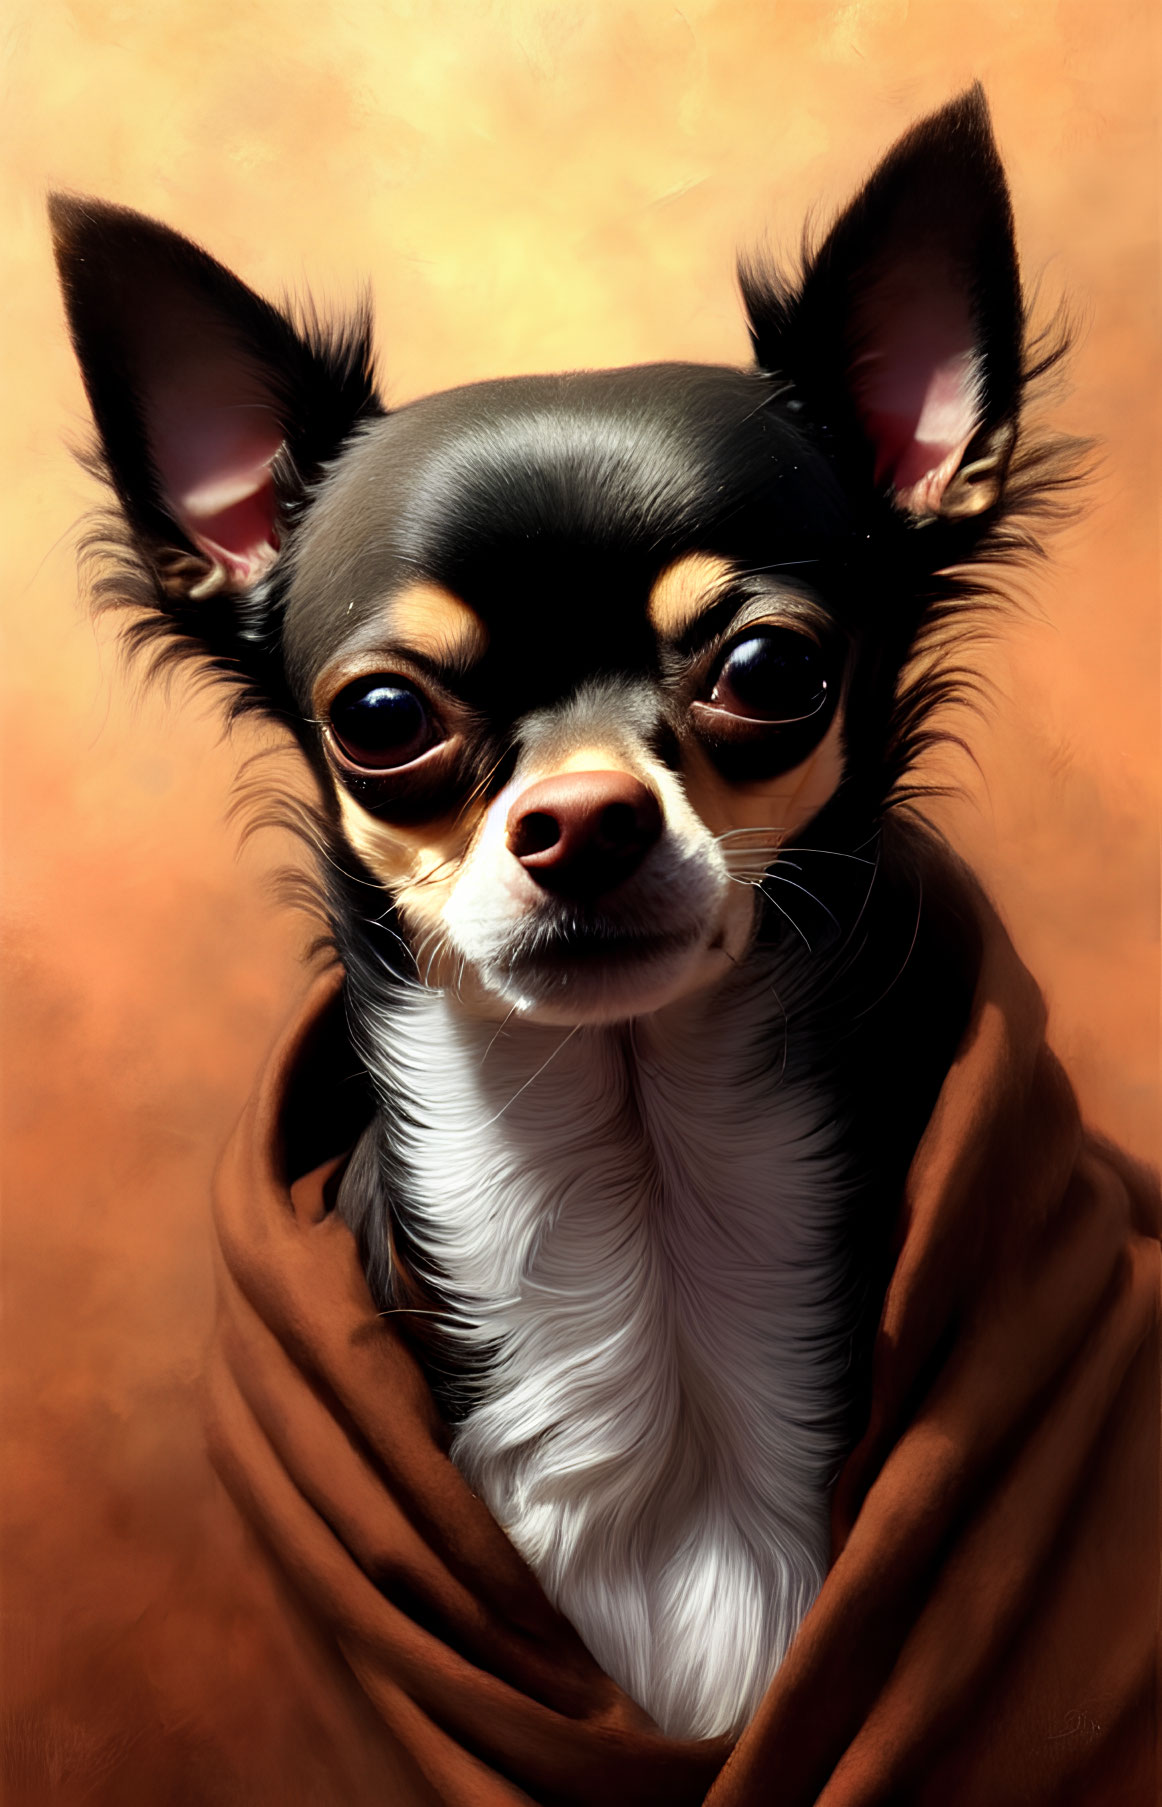 Chihuahua with large ears and big eyes in brown blanket on orange background